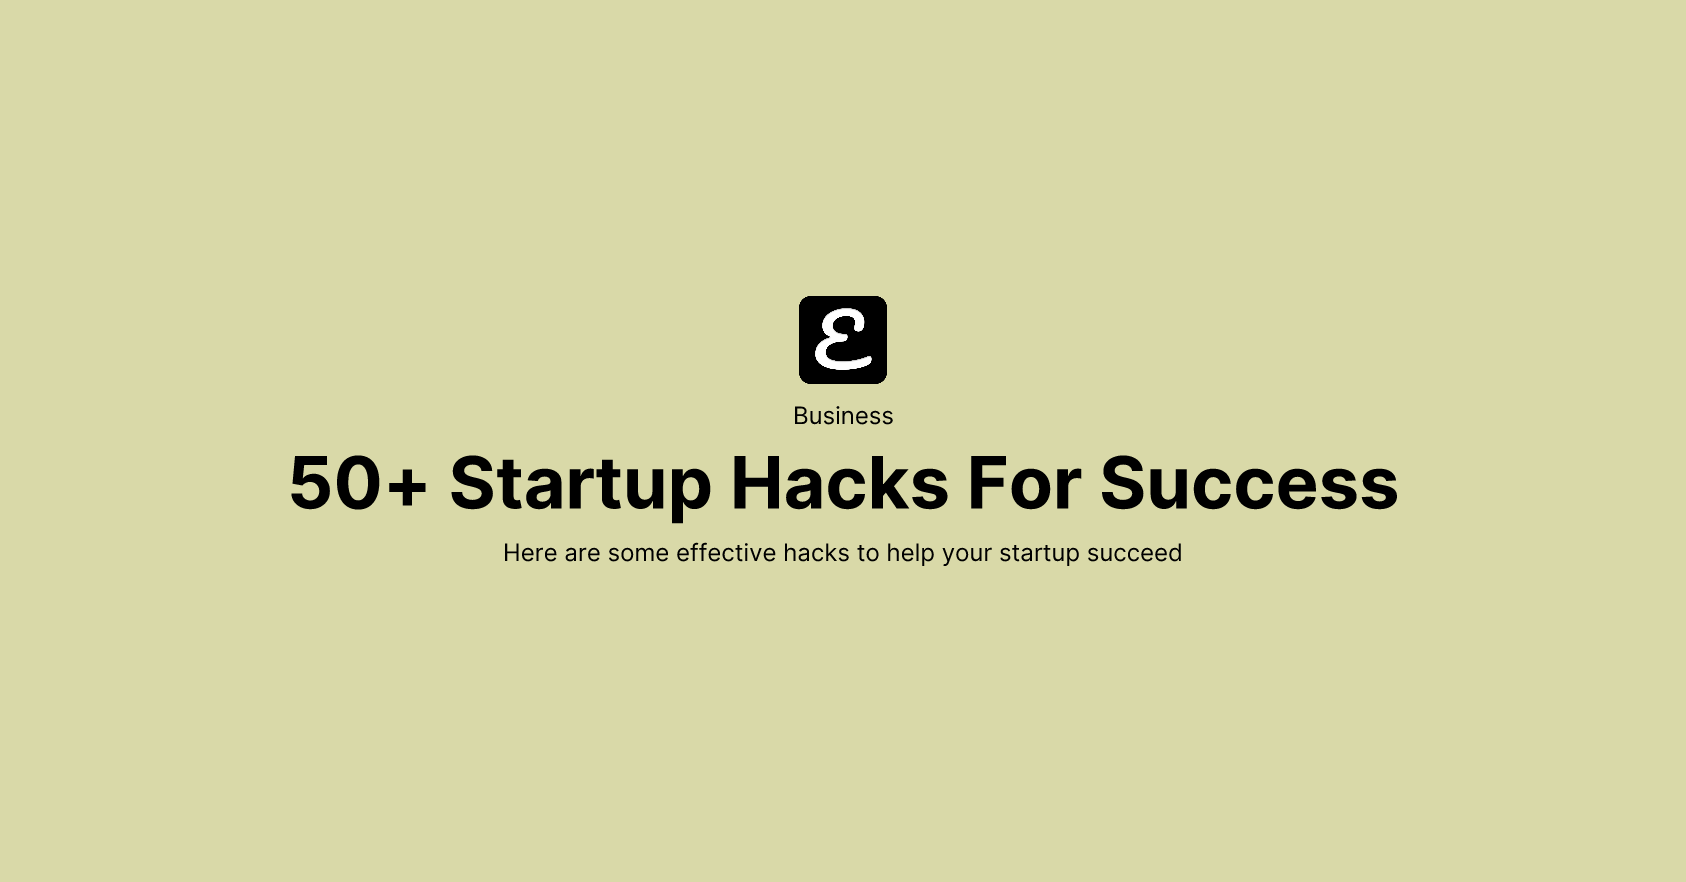 50+ Startup Hacks For Success by Eric David Smith